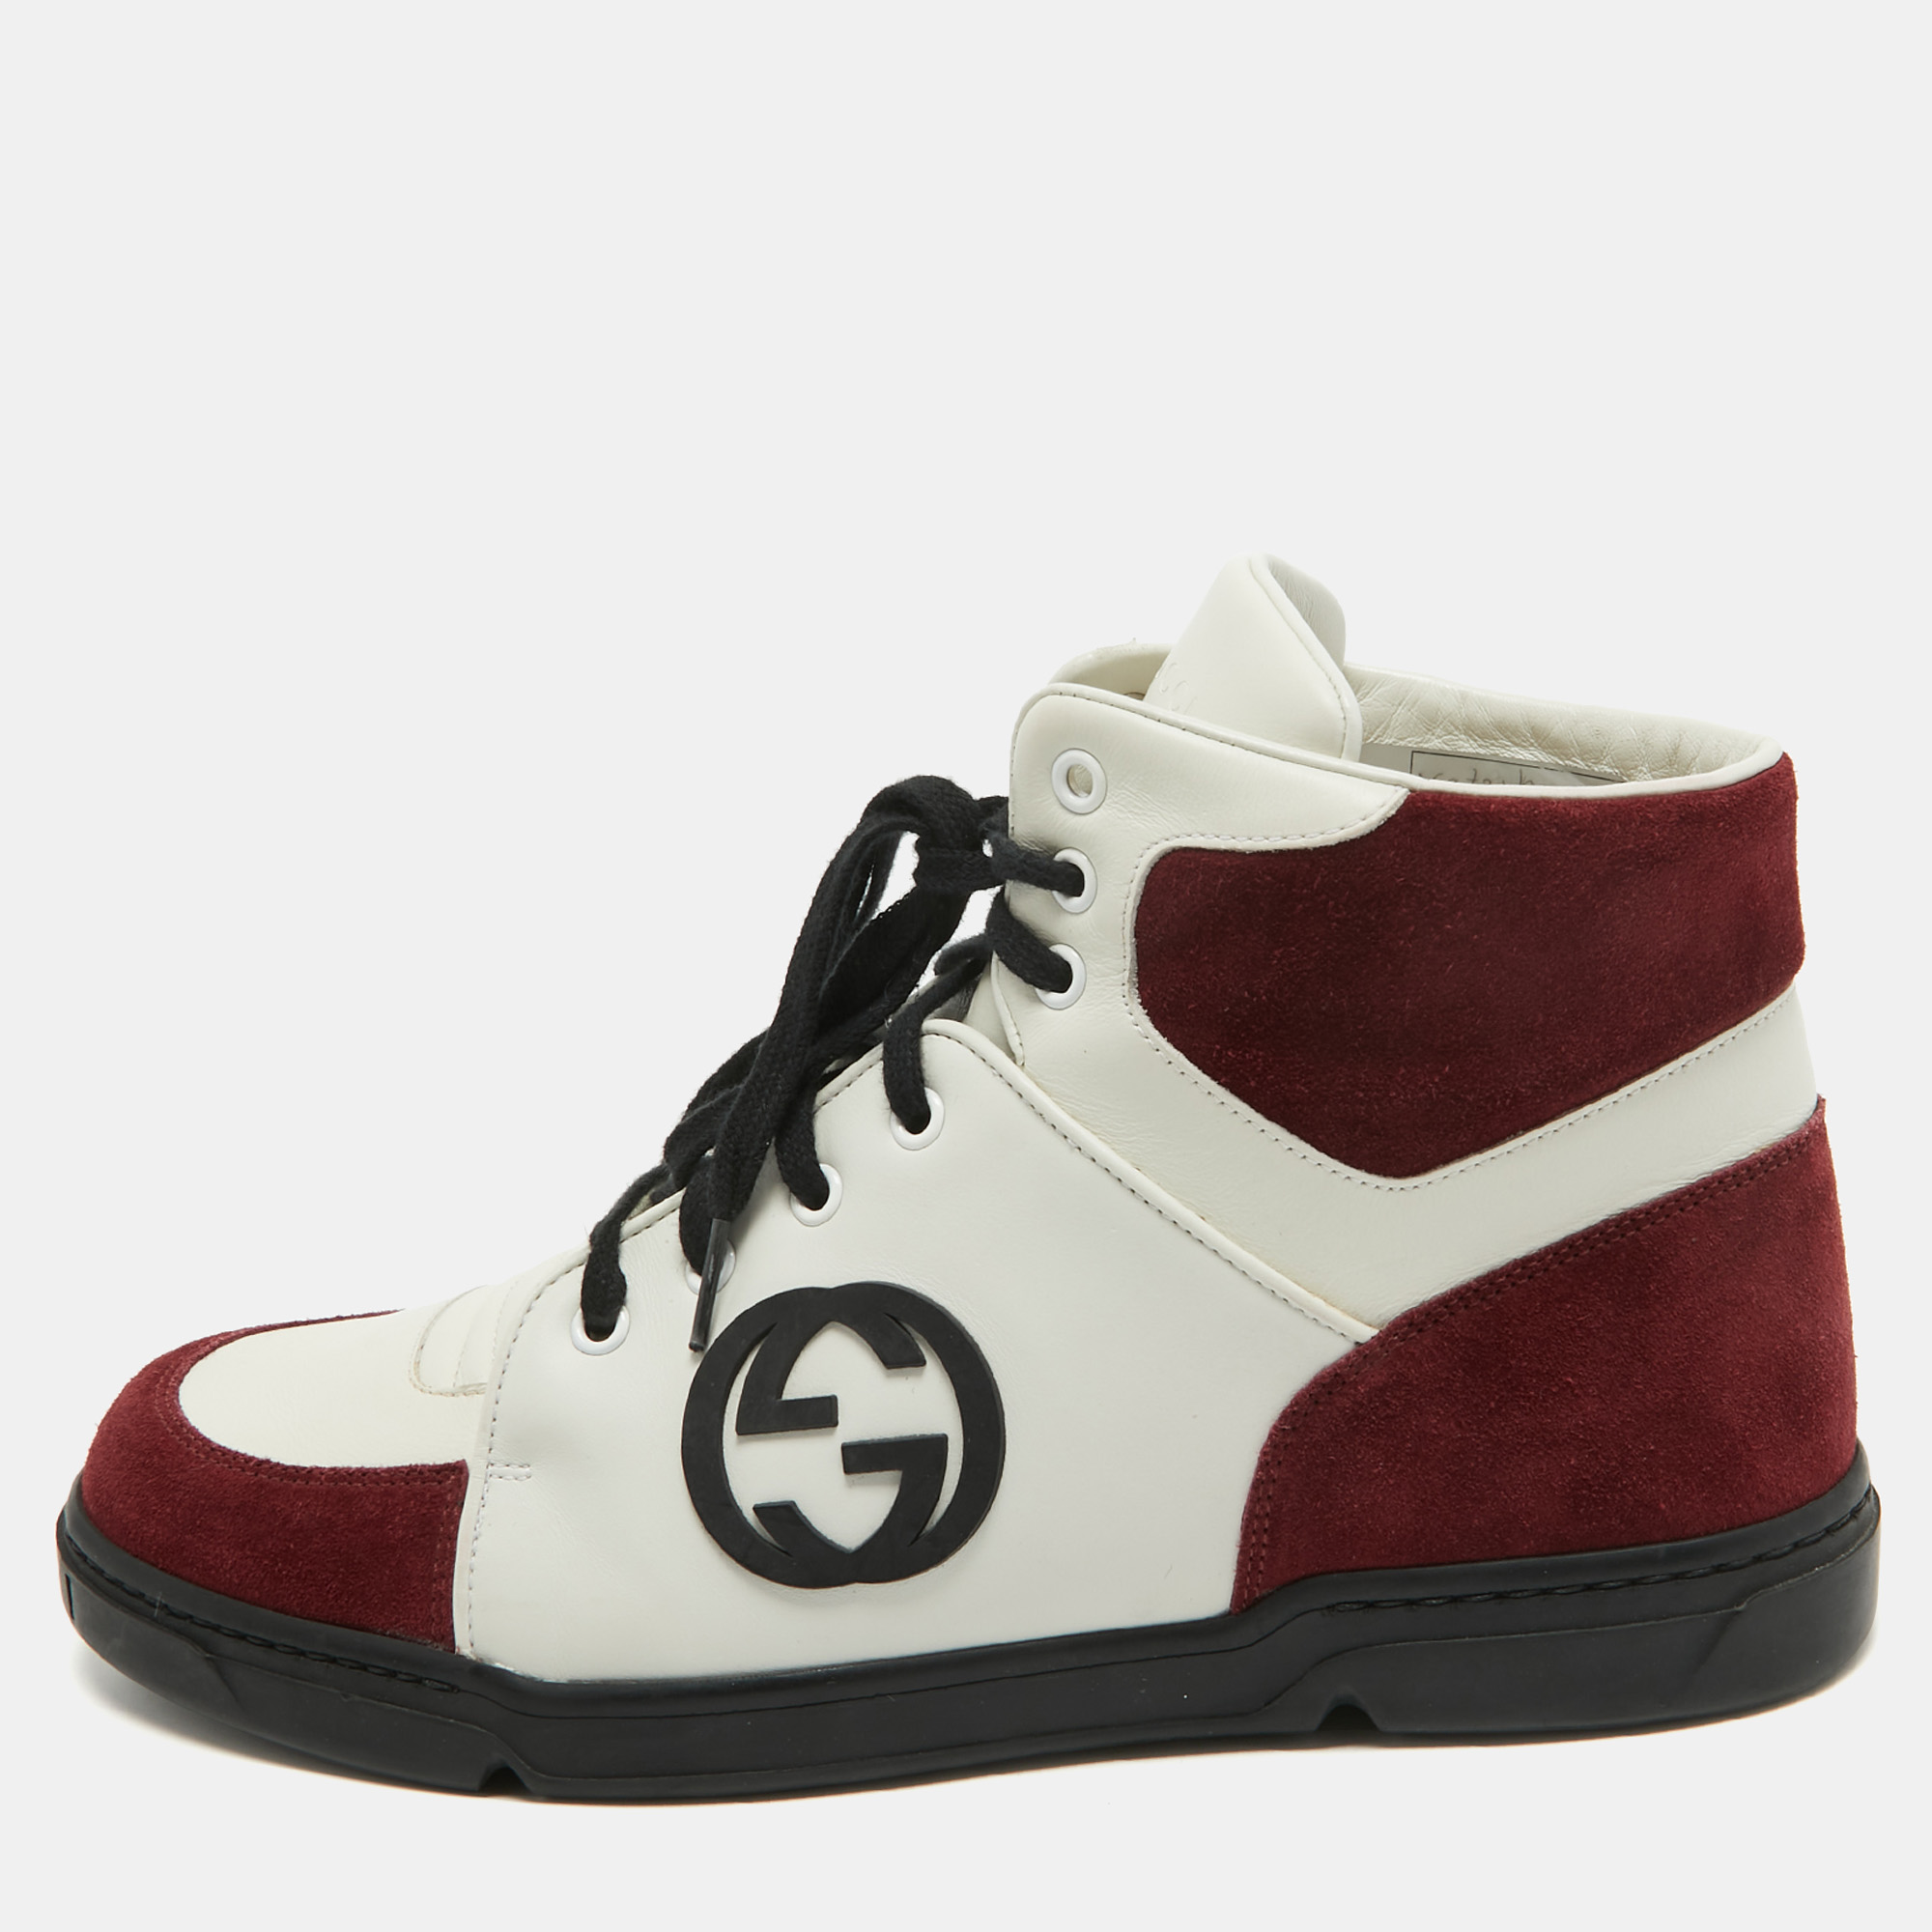 

Gucci Burgundy/White GG Interlocking Leather Lace Up High Top Sneakers Size